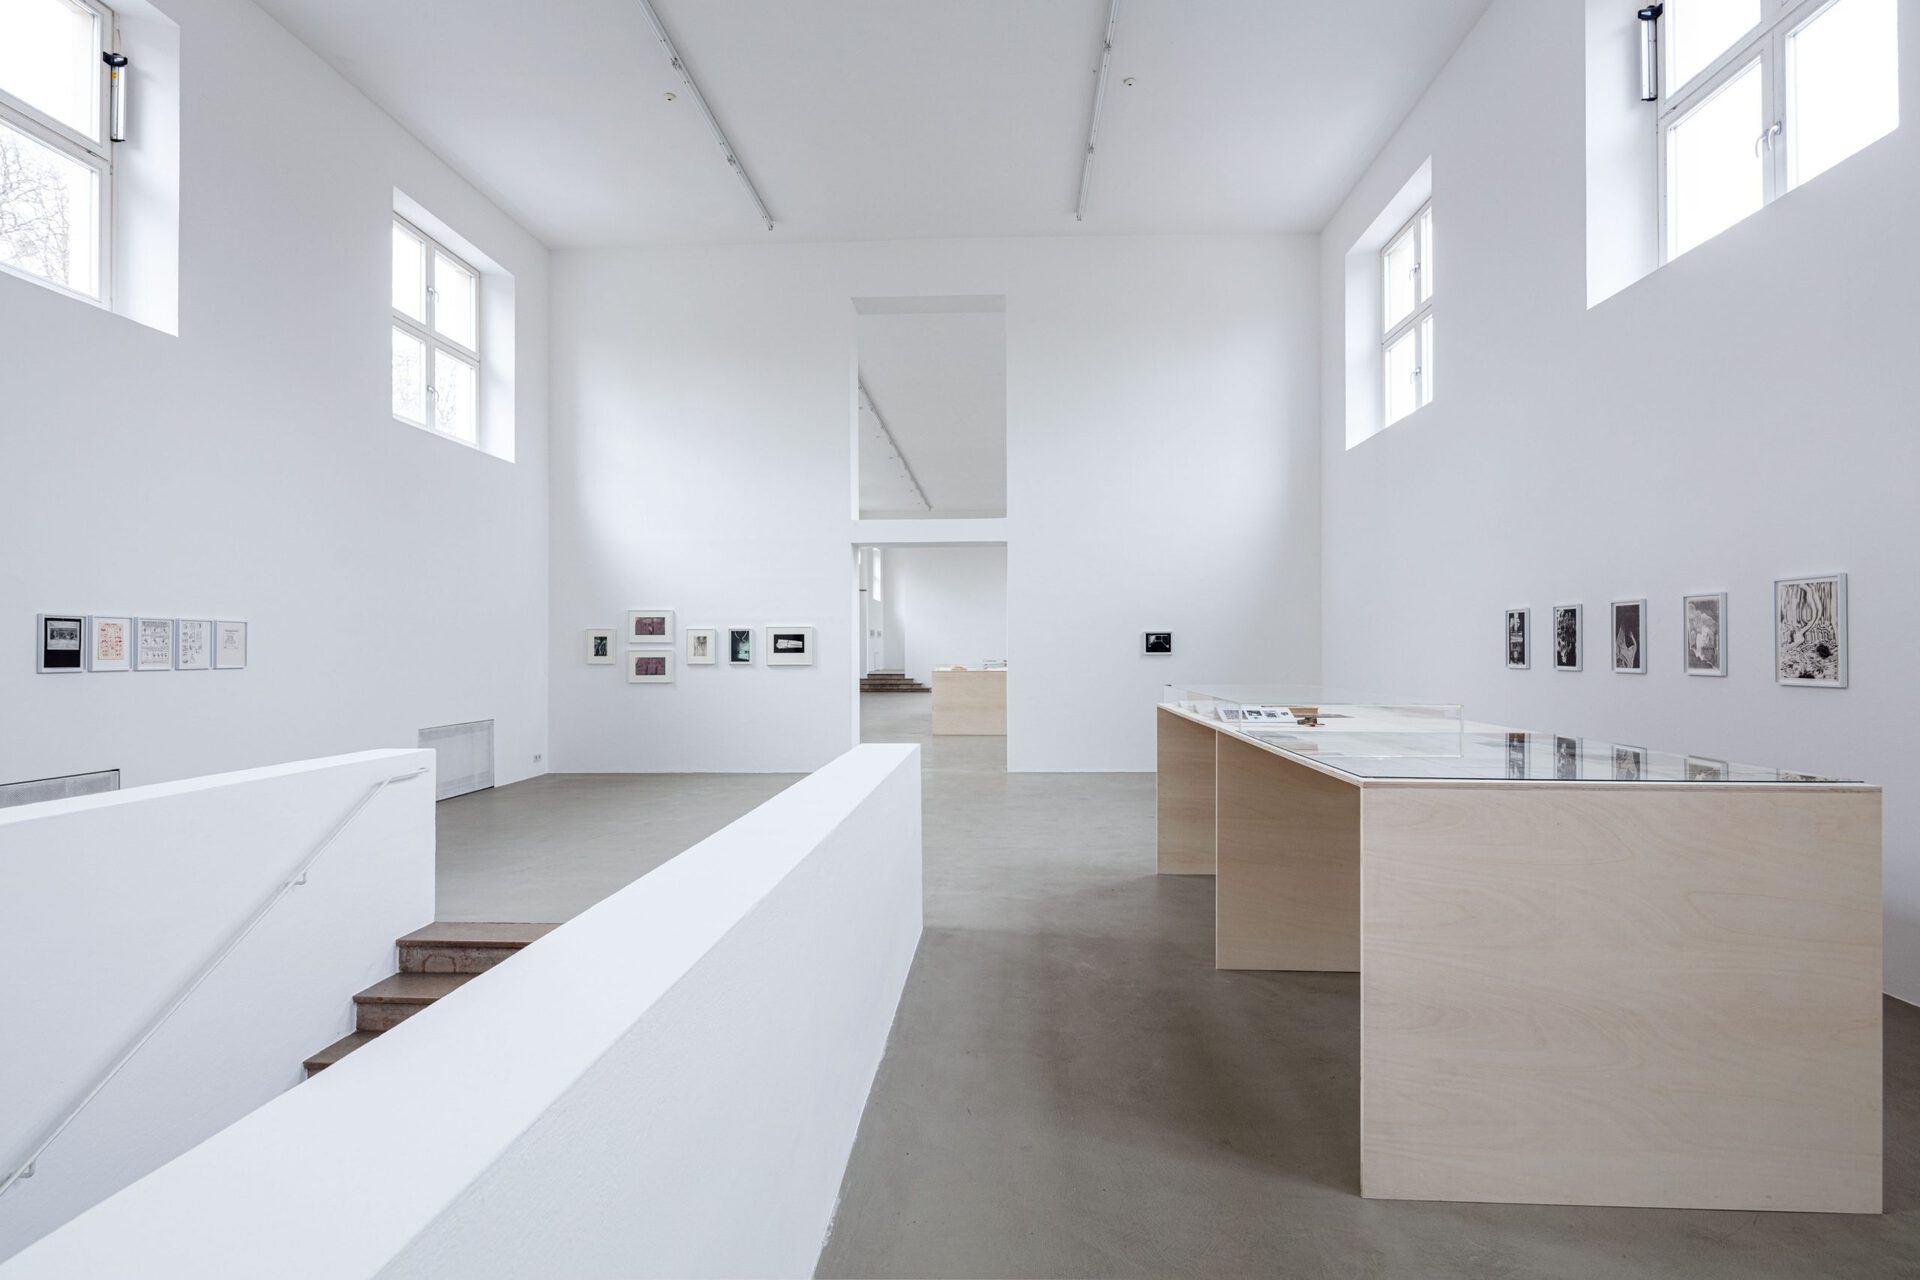 Installation view of Pati Hill – Something other than either at Kunstverein München, 2020; Courtesy Kunstverein München e.V.; Pati Hill Collection, Arcadia University; Photo: Sebastian Kissel.